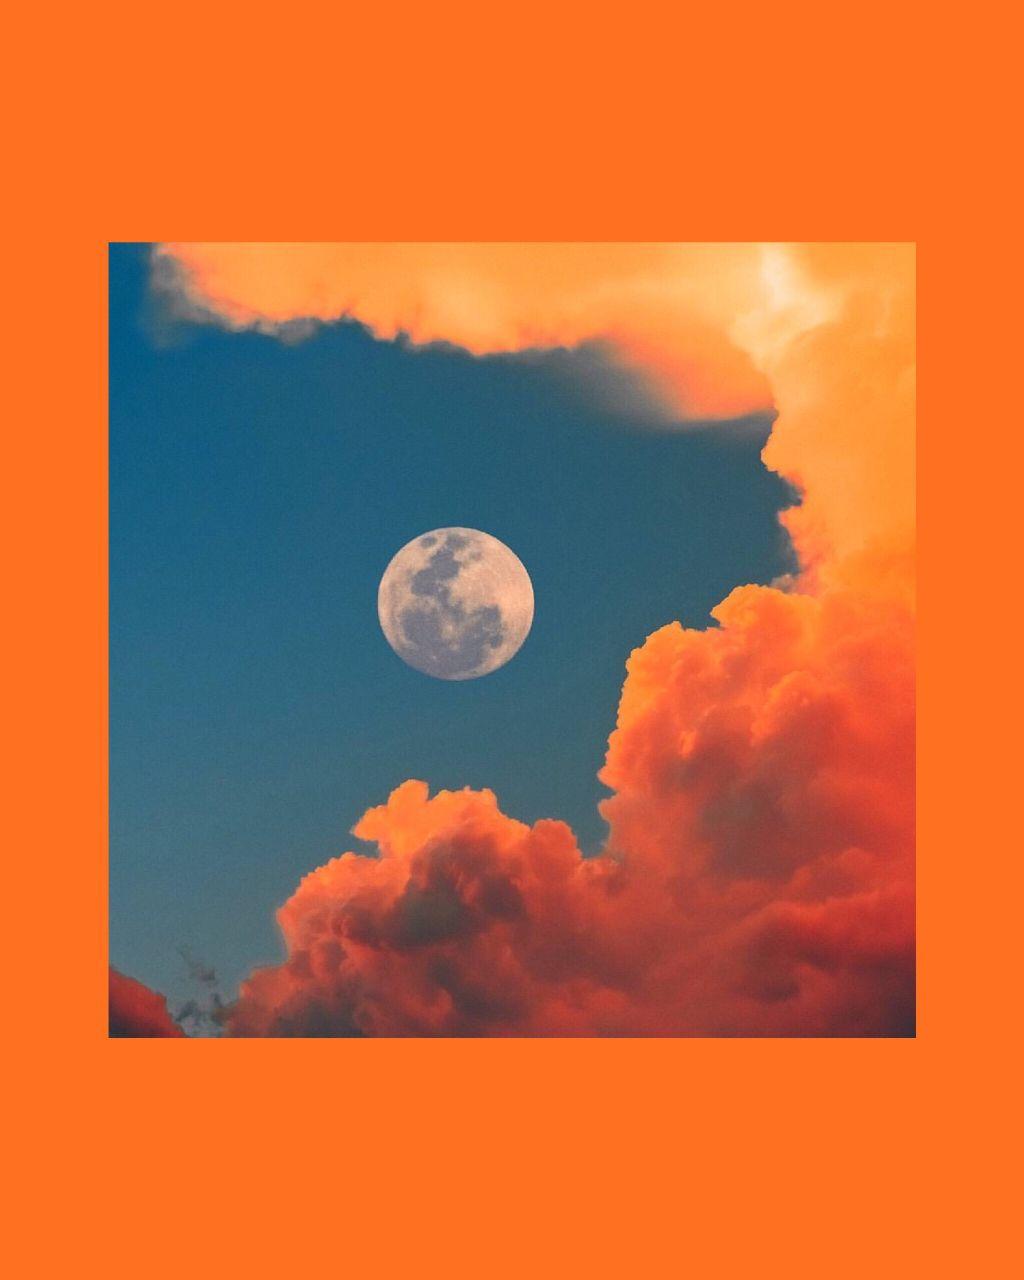 Aesthetic Blue And Orange Wallpapers